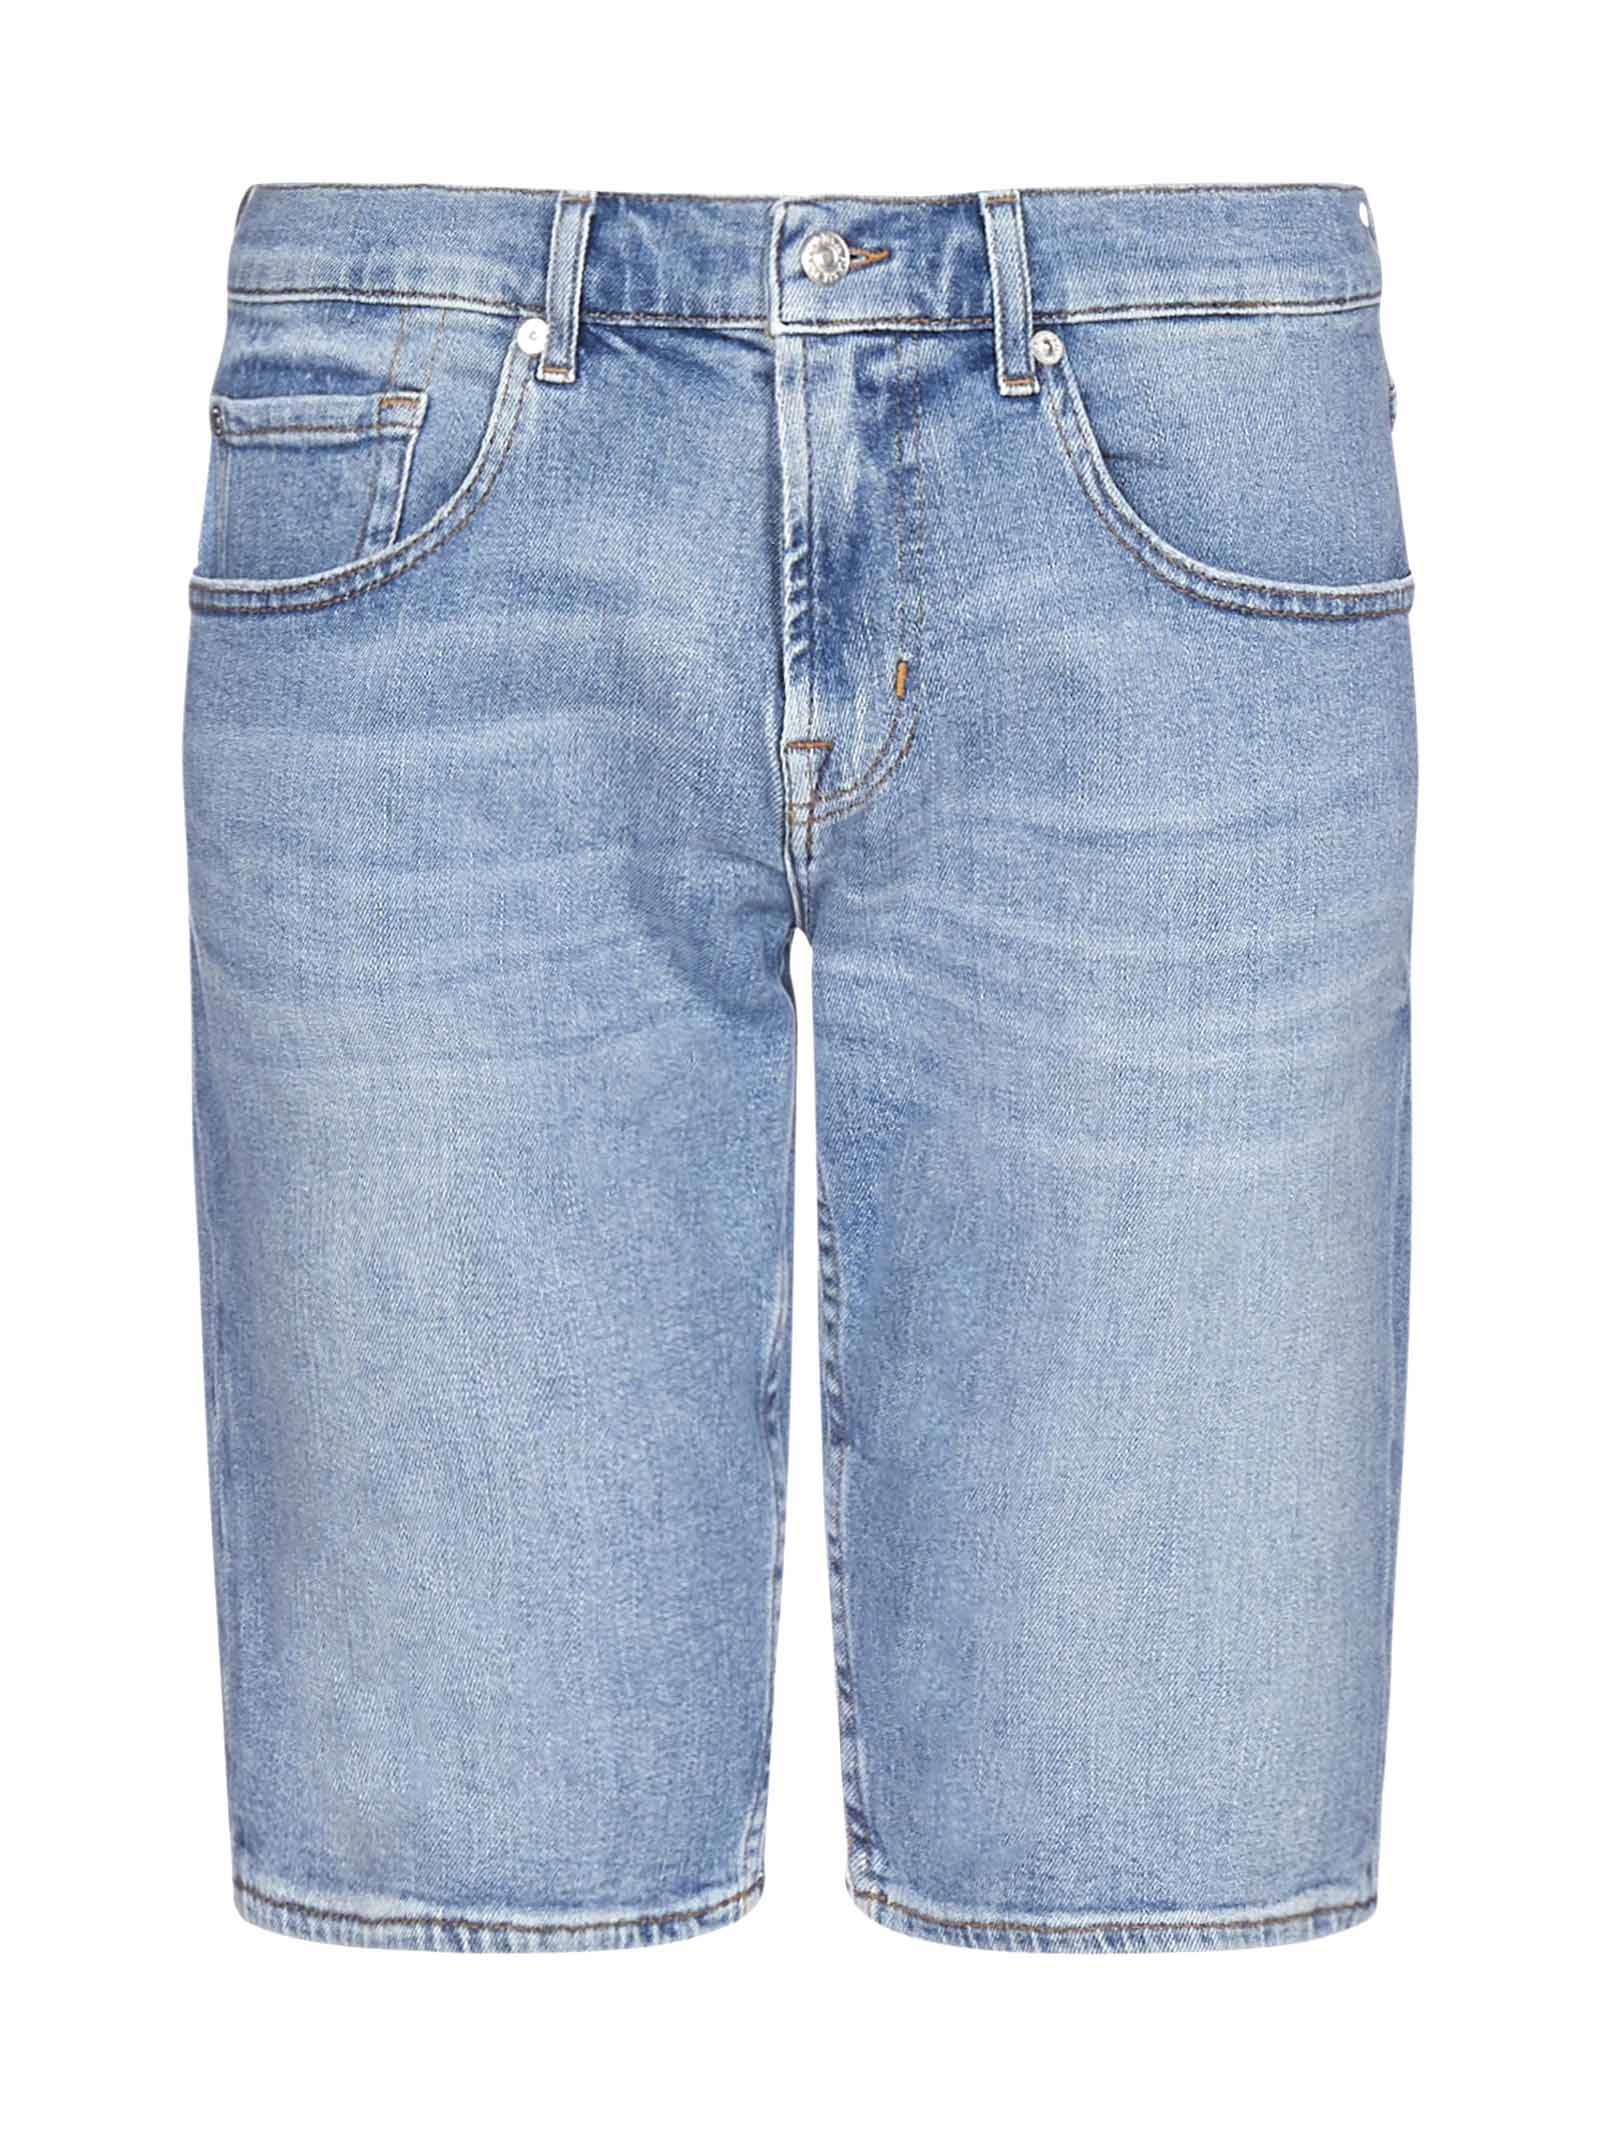 7 For All Mankind Shorts